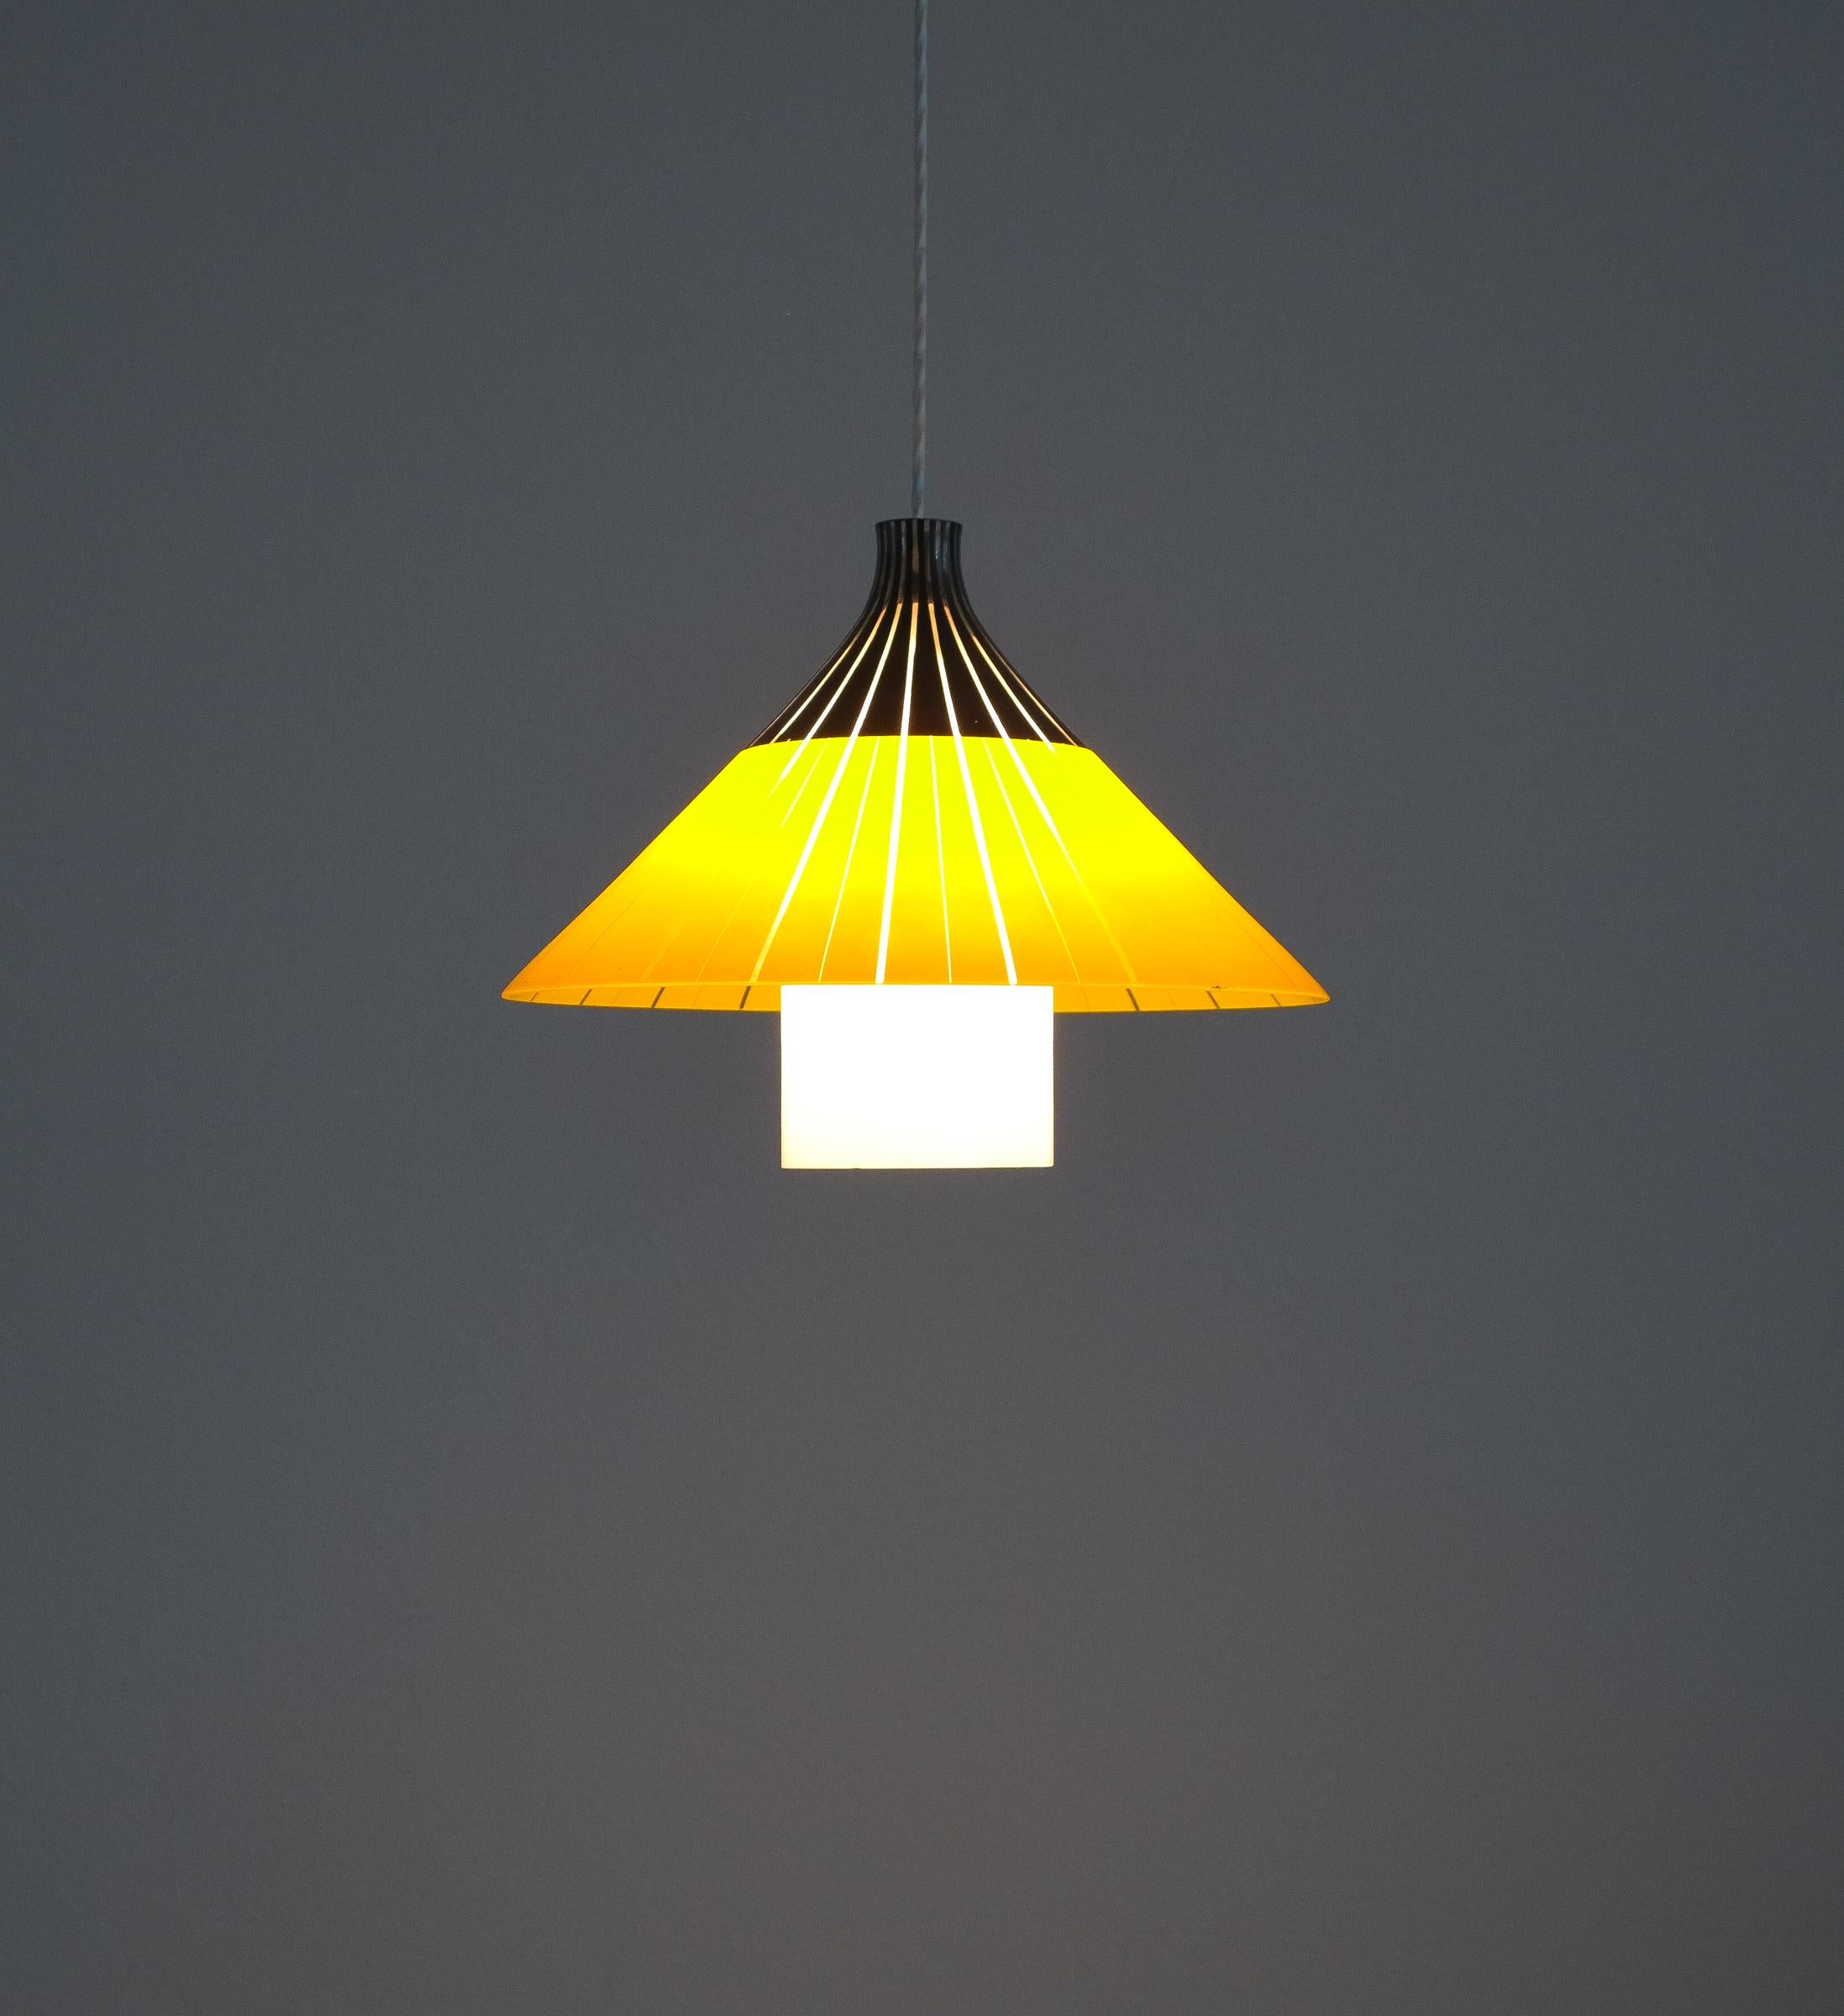 Yellow white glass pendant lamp glass, Italy, circa 1950

Beautiful Italian pendant light shaped like an Asian rice hat, the conical hat is fully made from yellow, black glass with clear glass stripes. The tubular diffuser is made from opal glass.